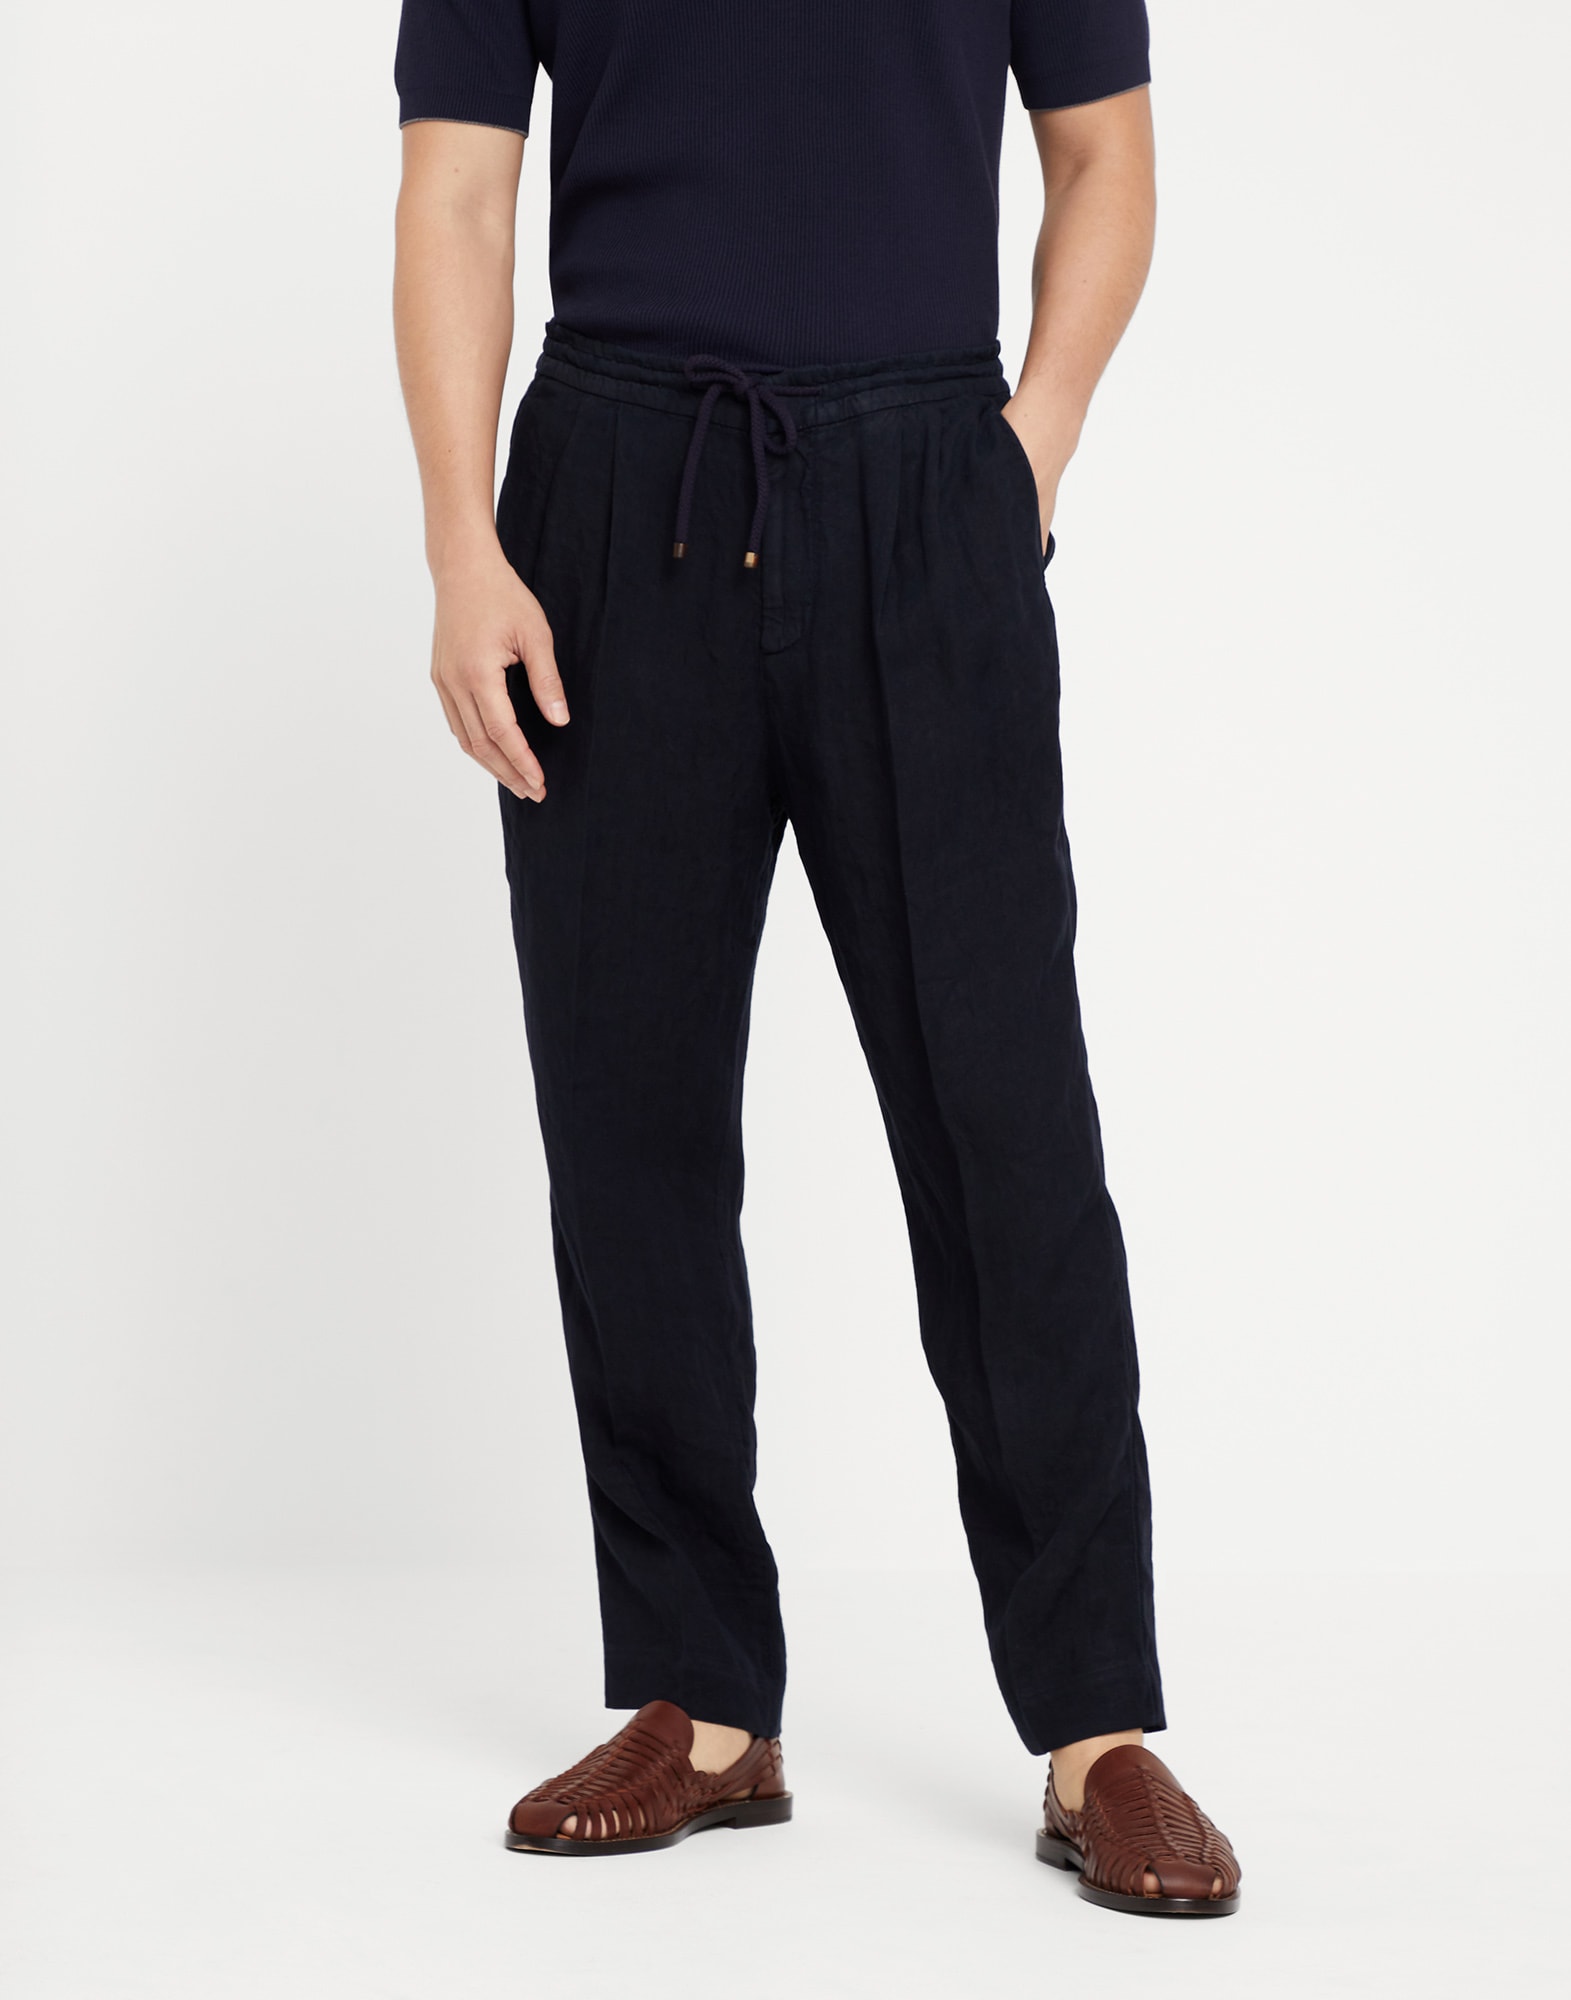 Leisure fit trousers with drawstring Navy Blue Man -
                        Brunello Cucinelli
                    